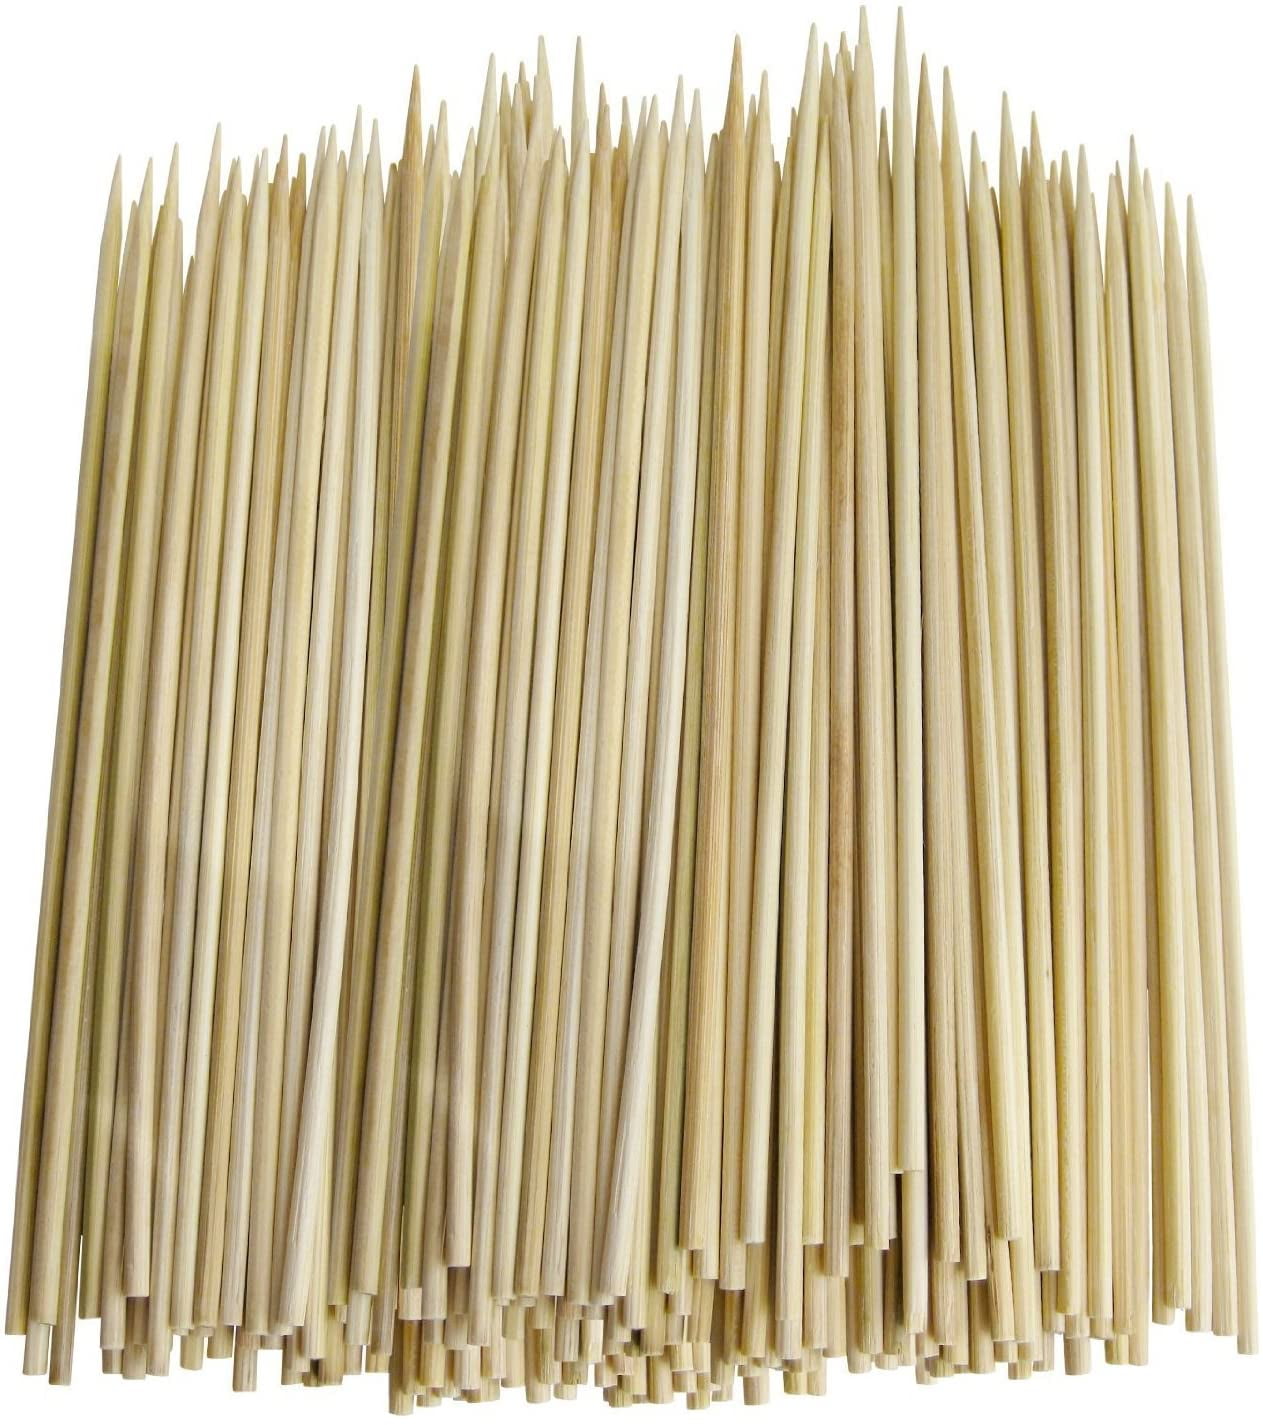 150 Bamboo Skewers Sticks BBQ Barbecue Party Grill Kebab Camping Cooking Outdoor 